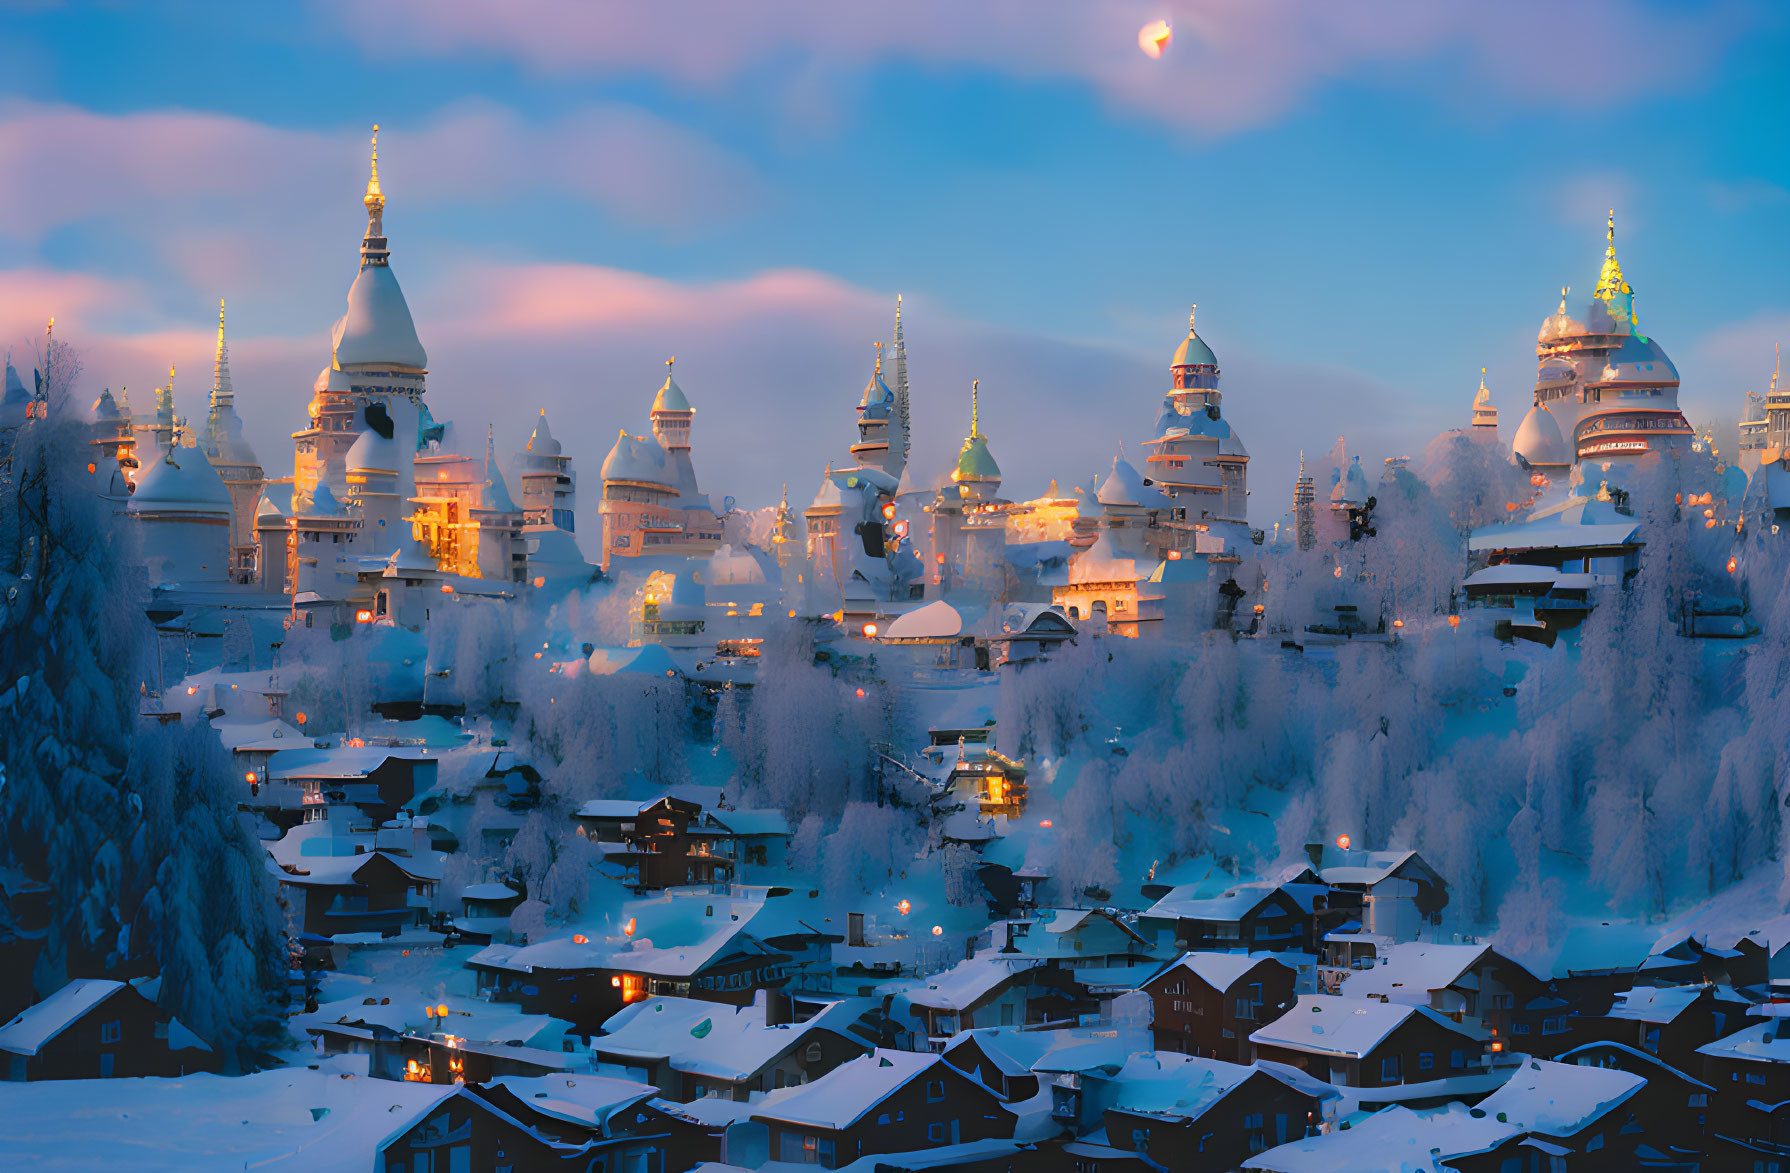 Snowy village at dusk with illuminated traditional buildings and crescent moon